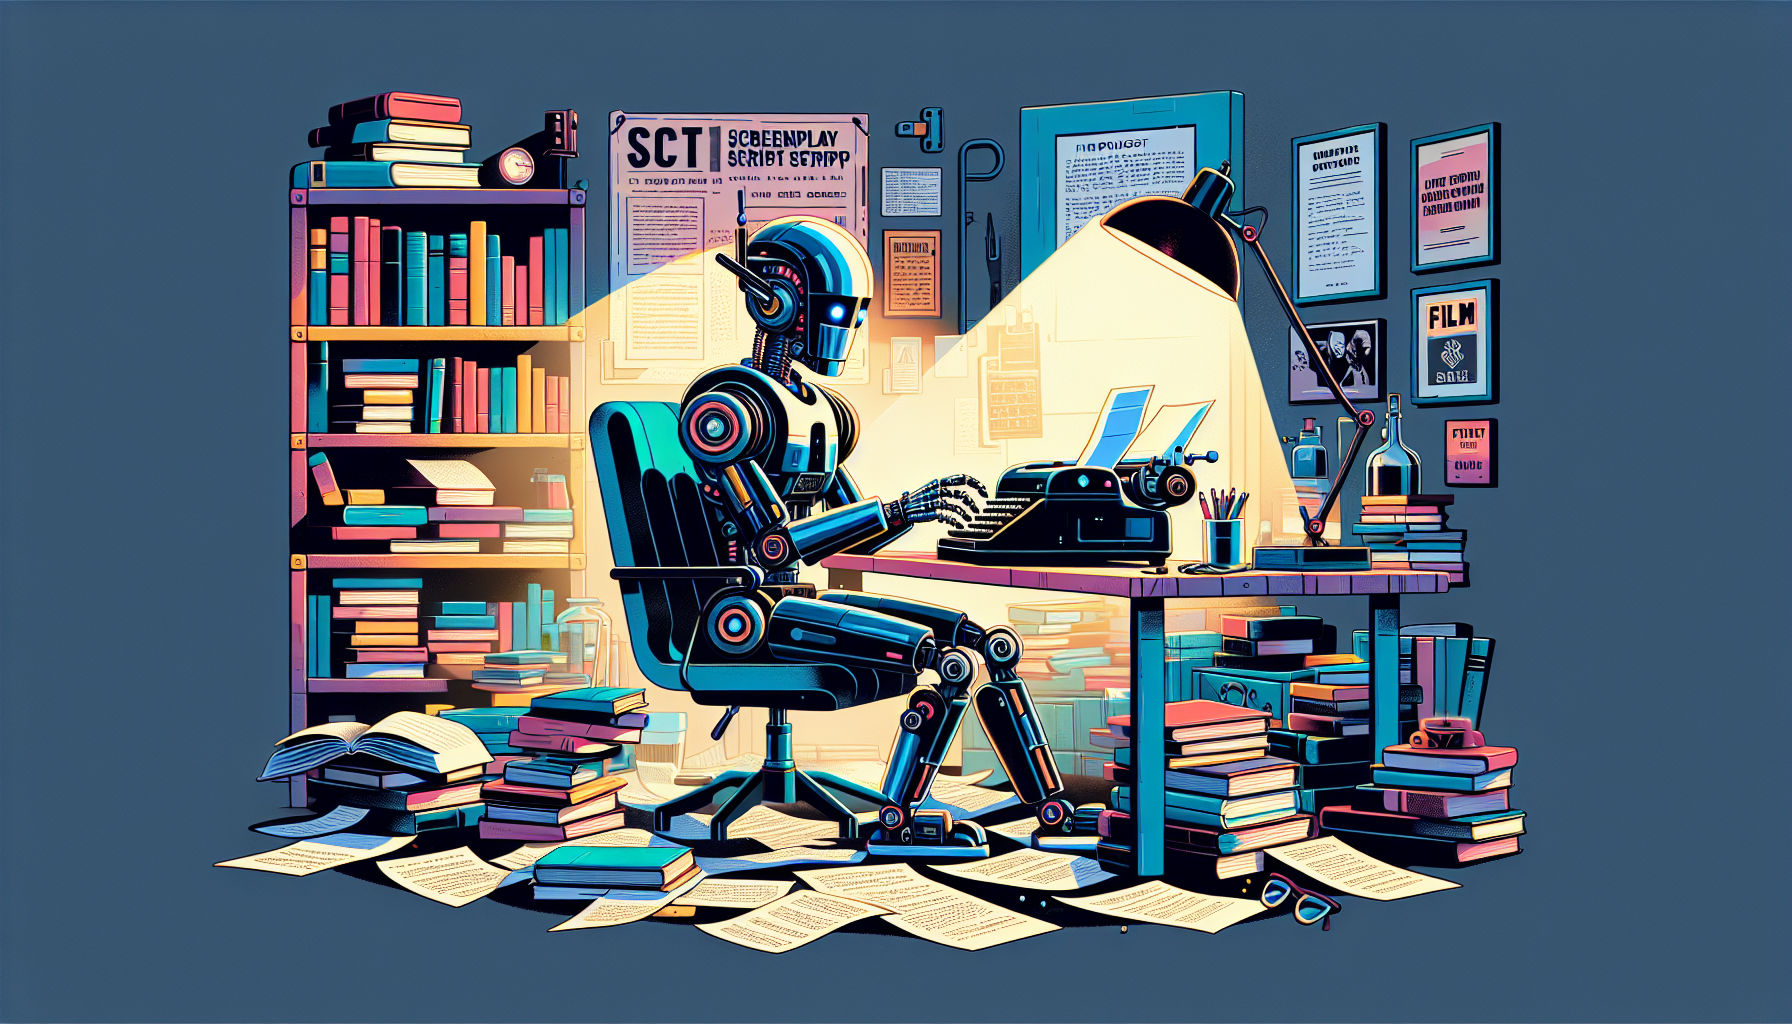 An image of a futuristic robot sitting at a cluttered desk, typing on a vintage typewriter under a soft desk lamp, surrounded by piles of screenplay scripts and film project posters in a cozy, book-li